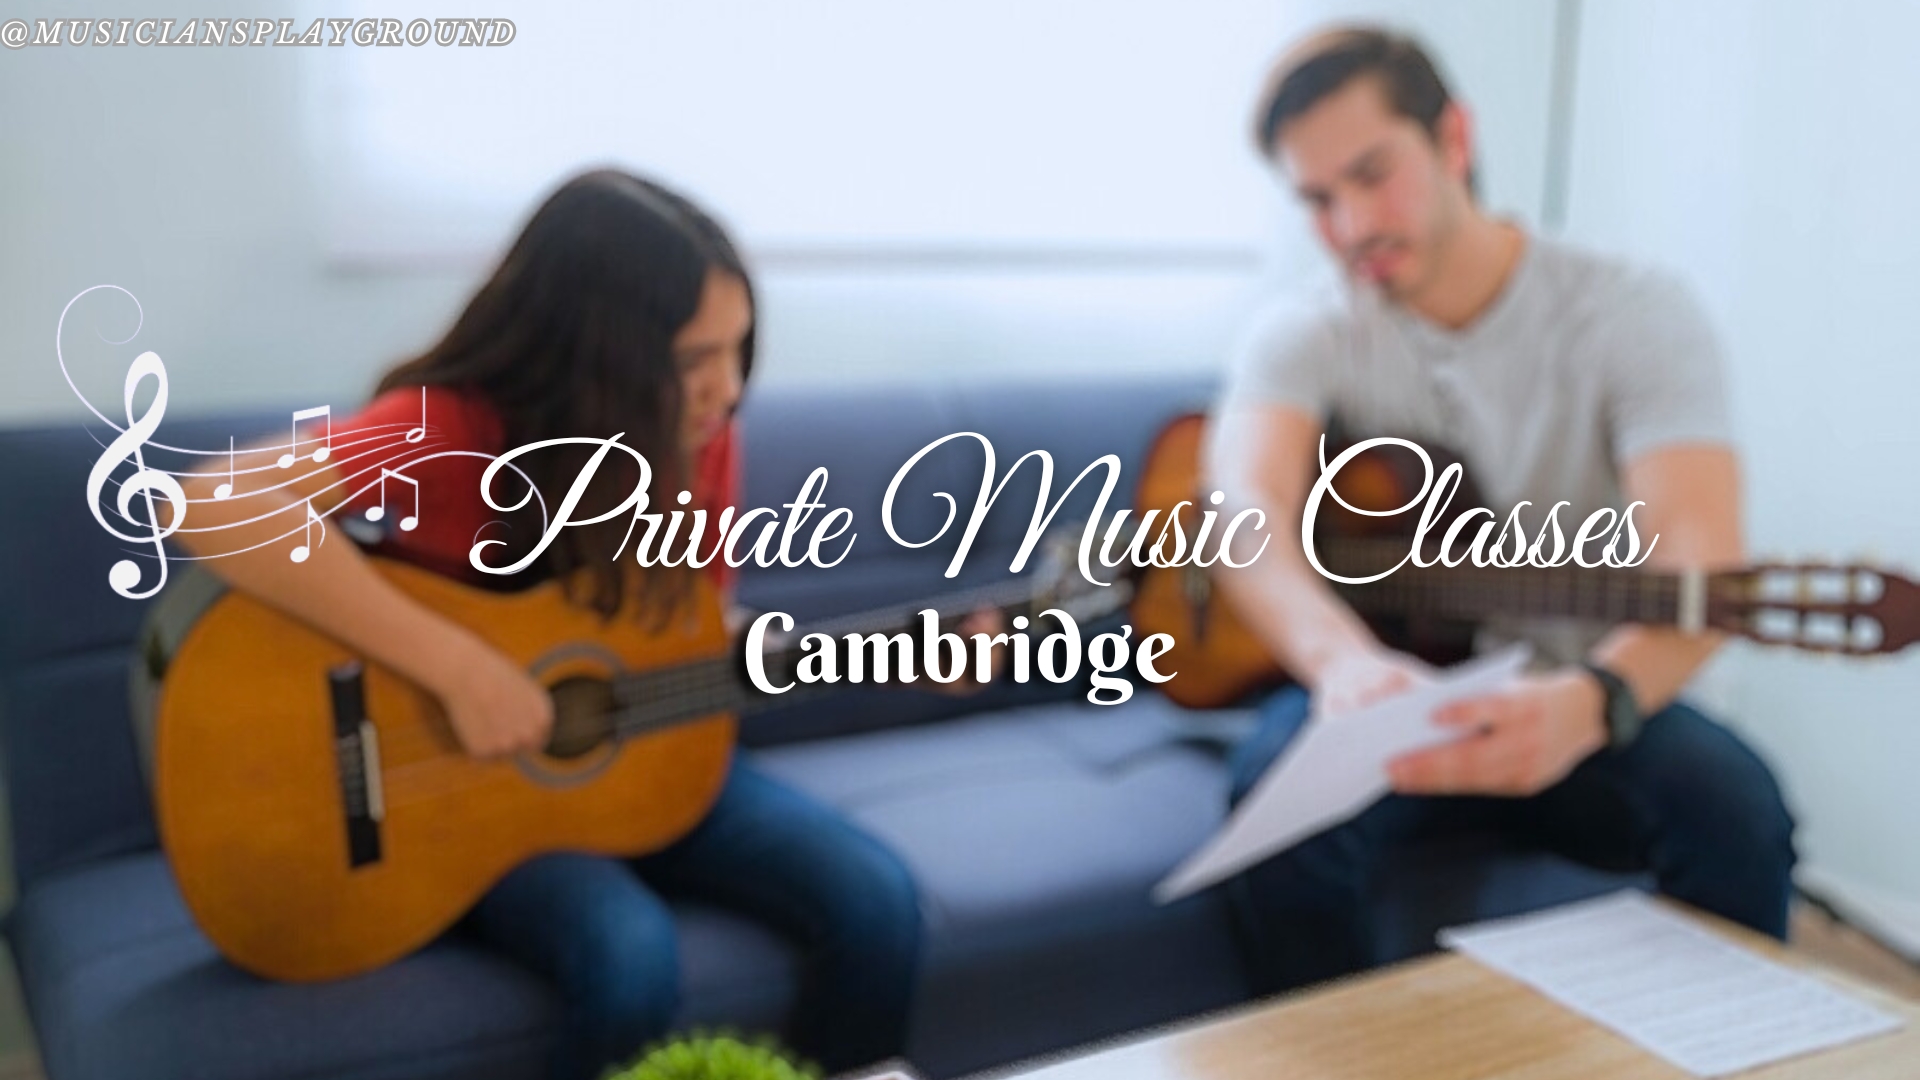 Private Music Lessons in Cambridge, Massachusetts: Enhancing Music Education at Musicians Playground